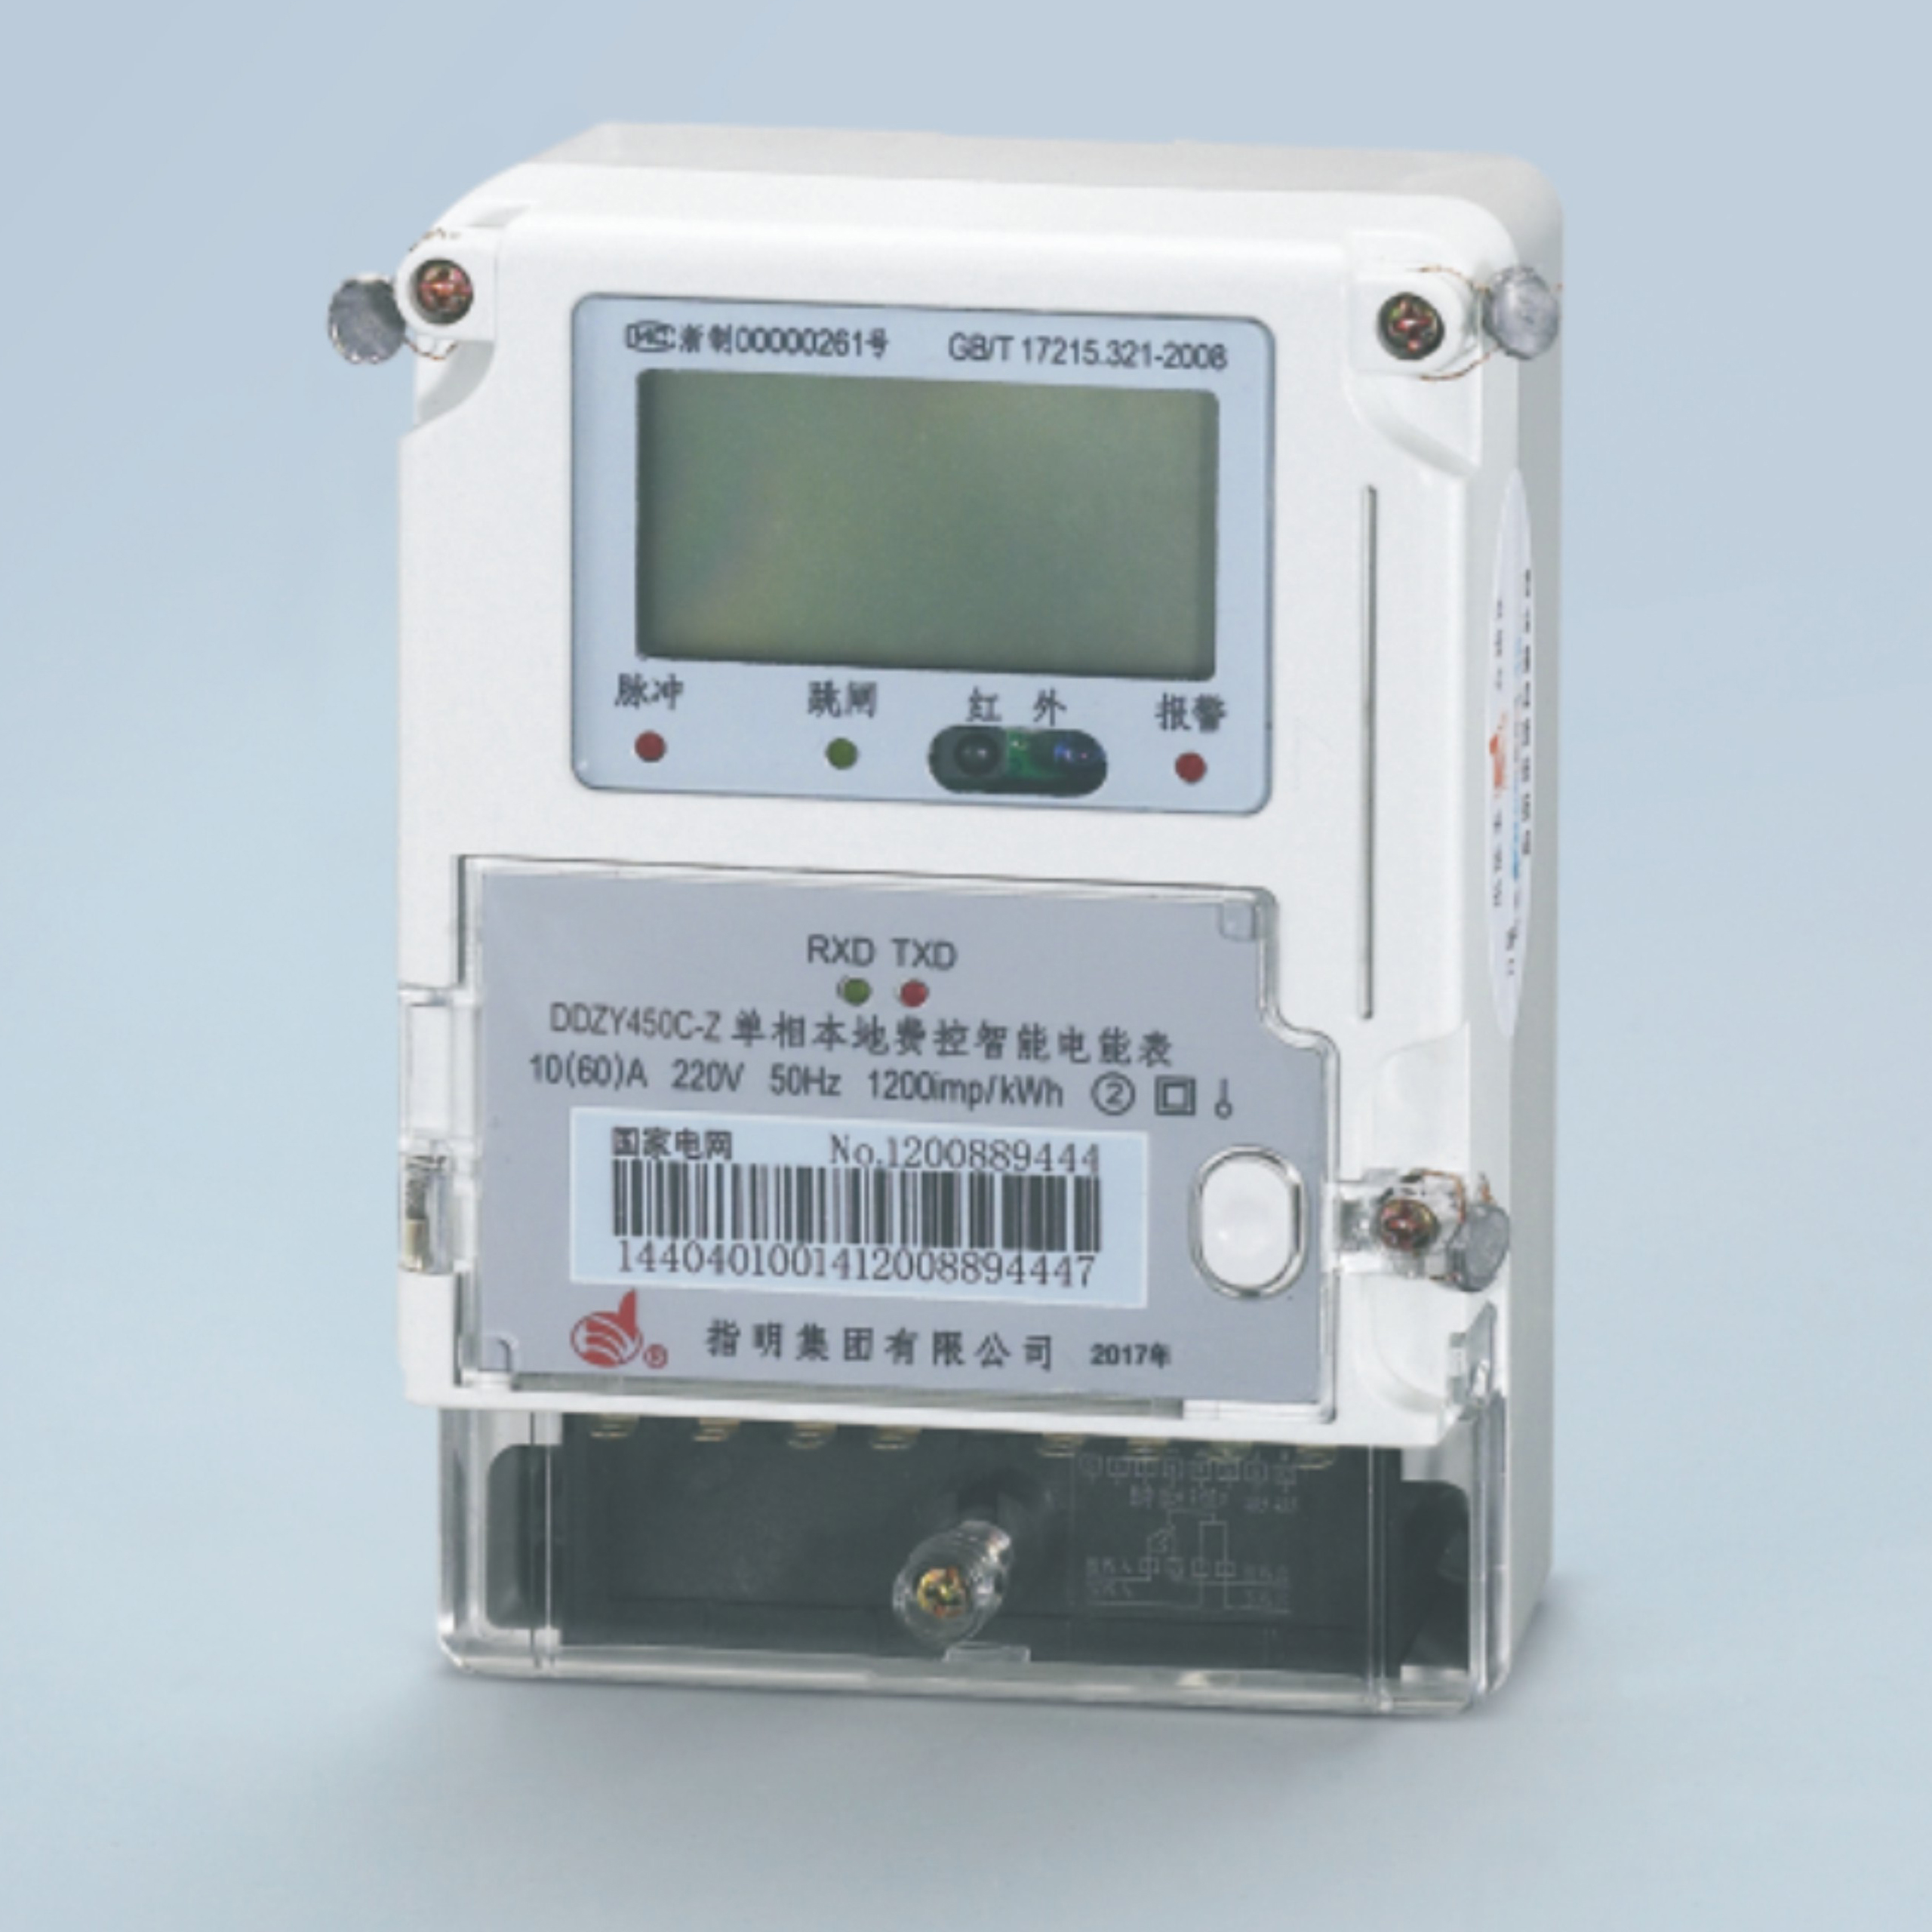 DDZY450C-Z Single phase local tariff controlled intelligent energy meter 